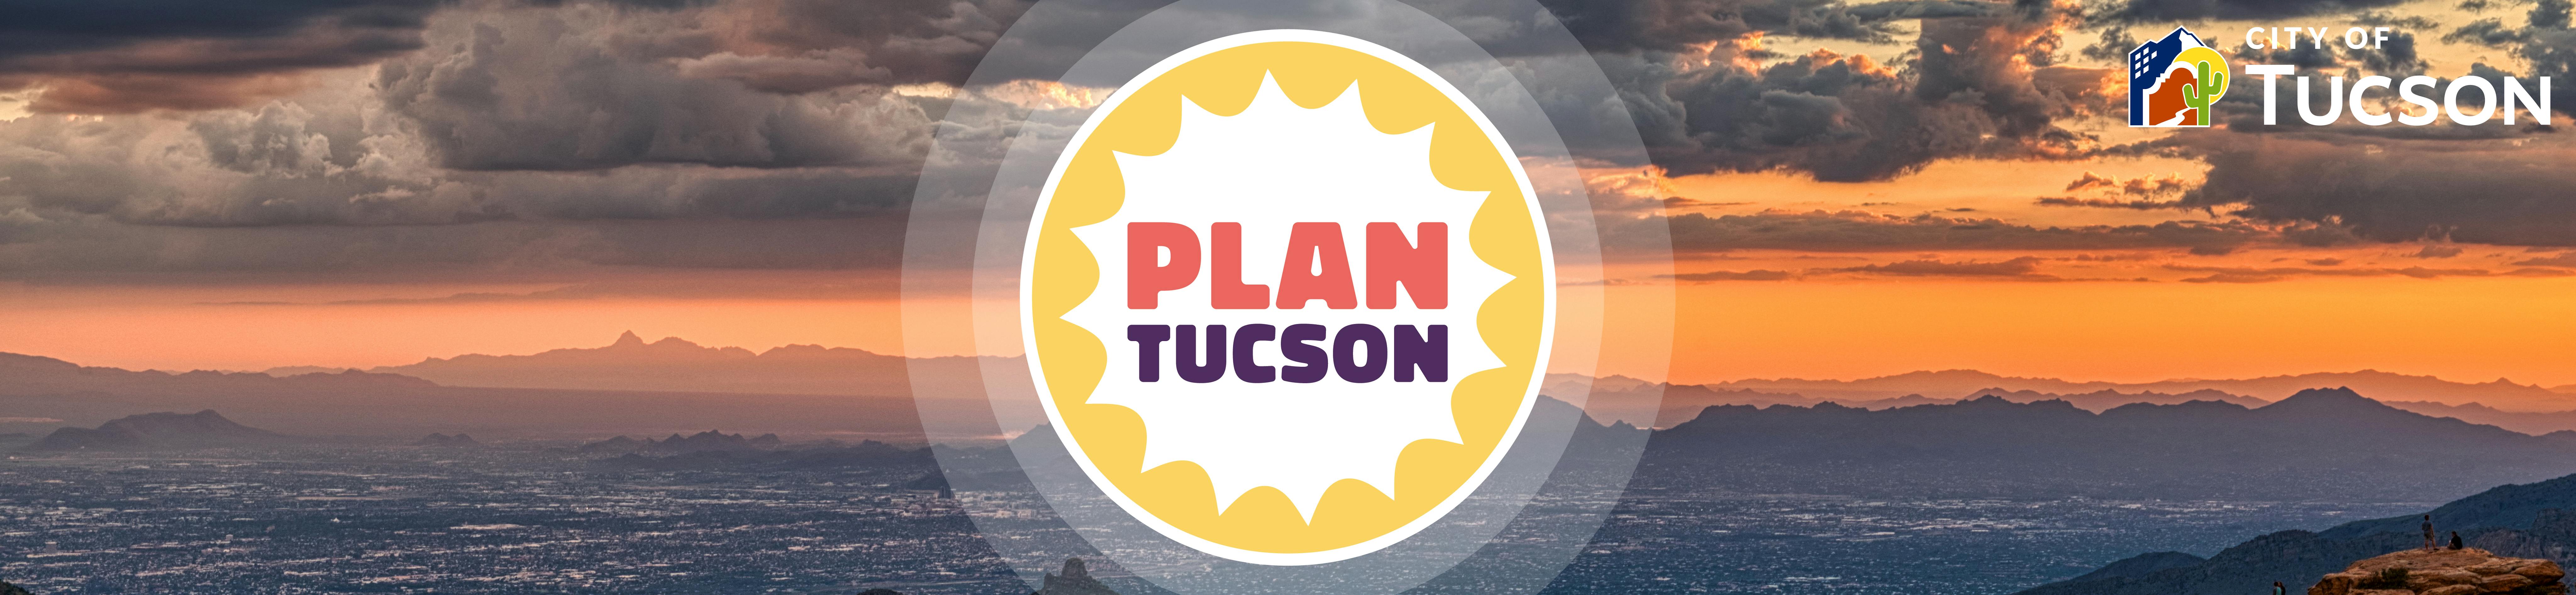 Plan Tucson logo with view of the city with sunset in the background